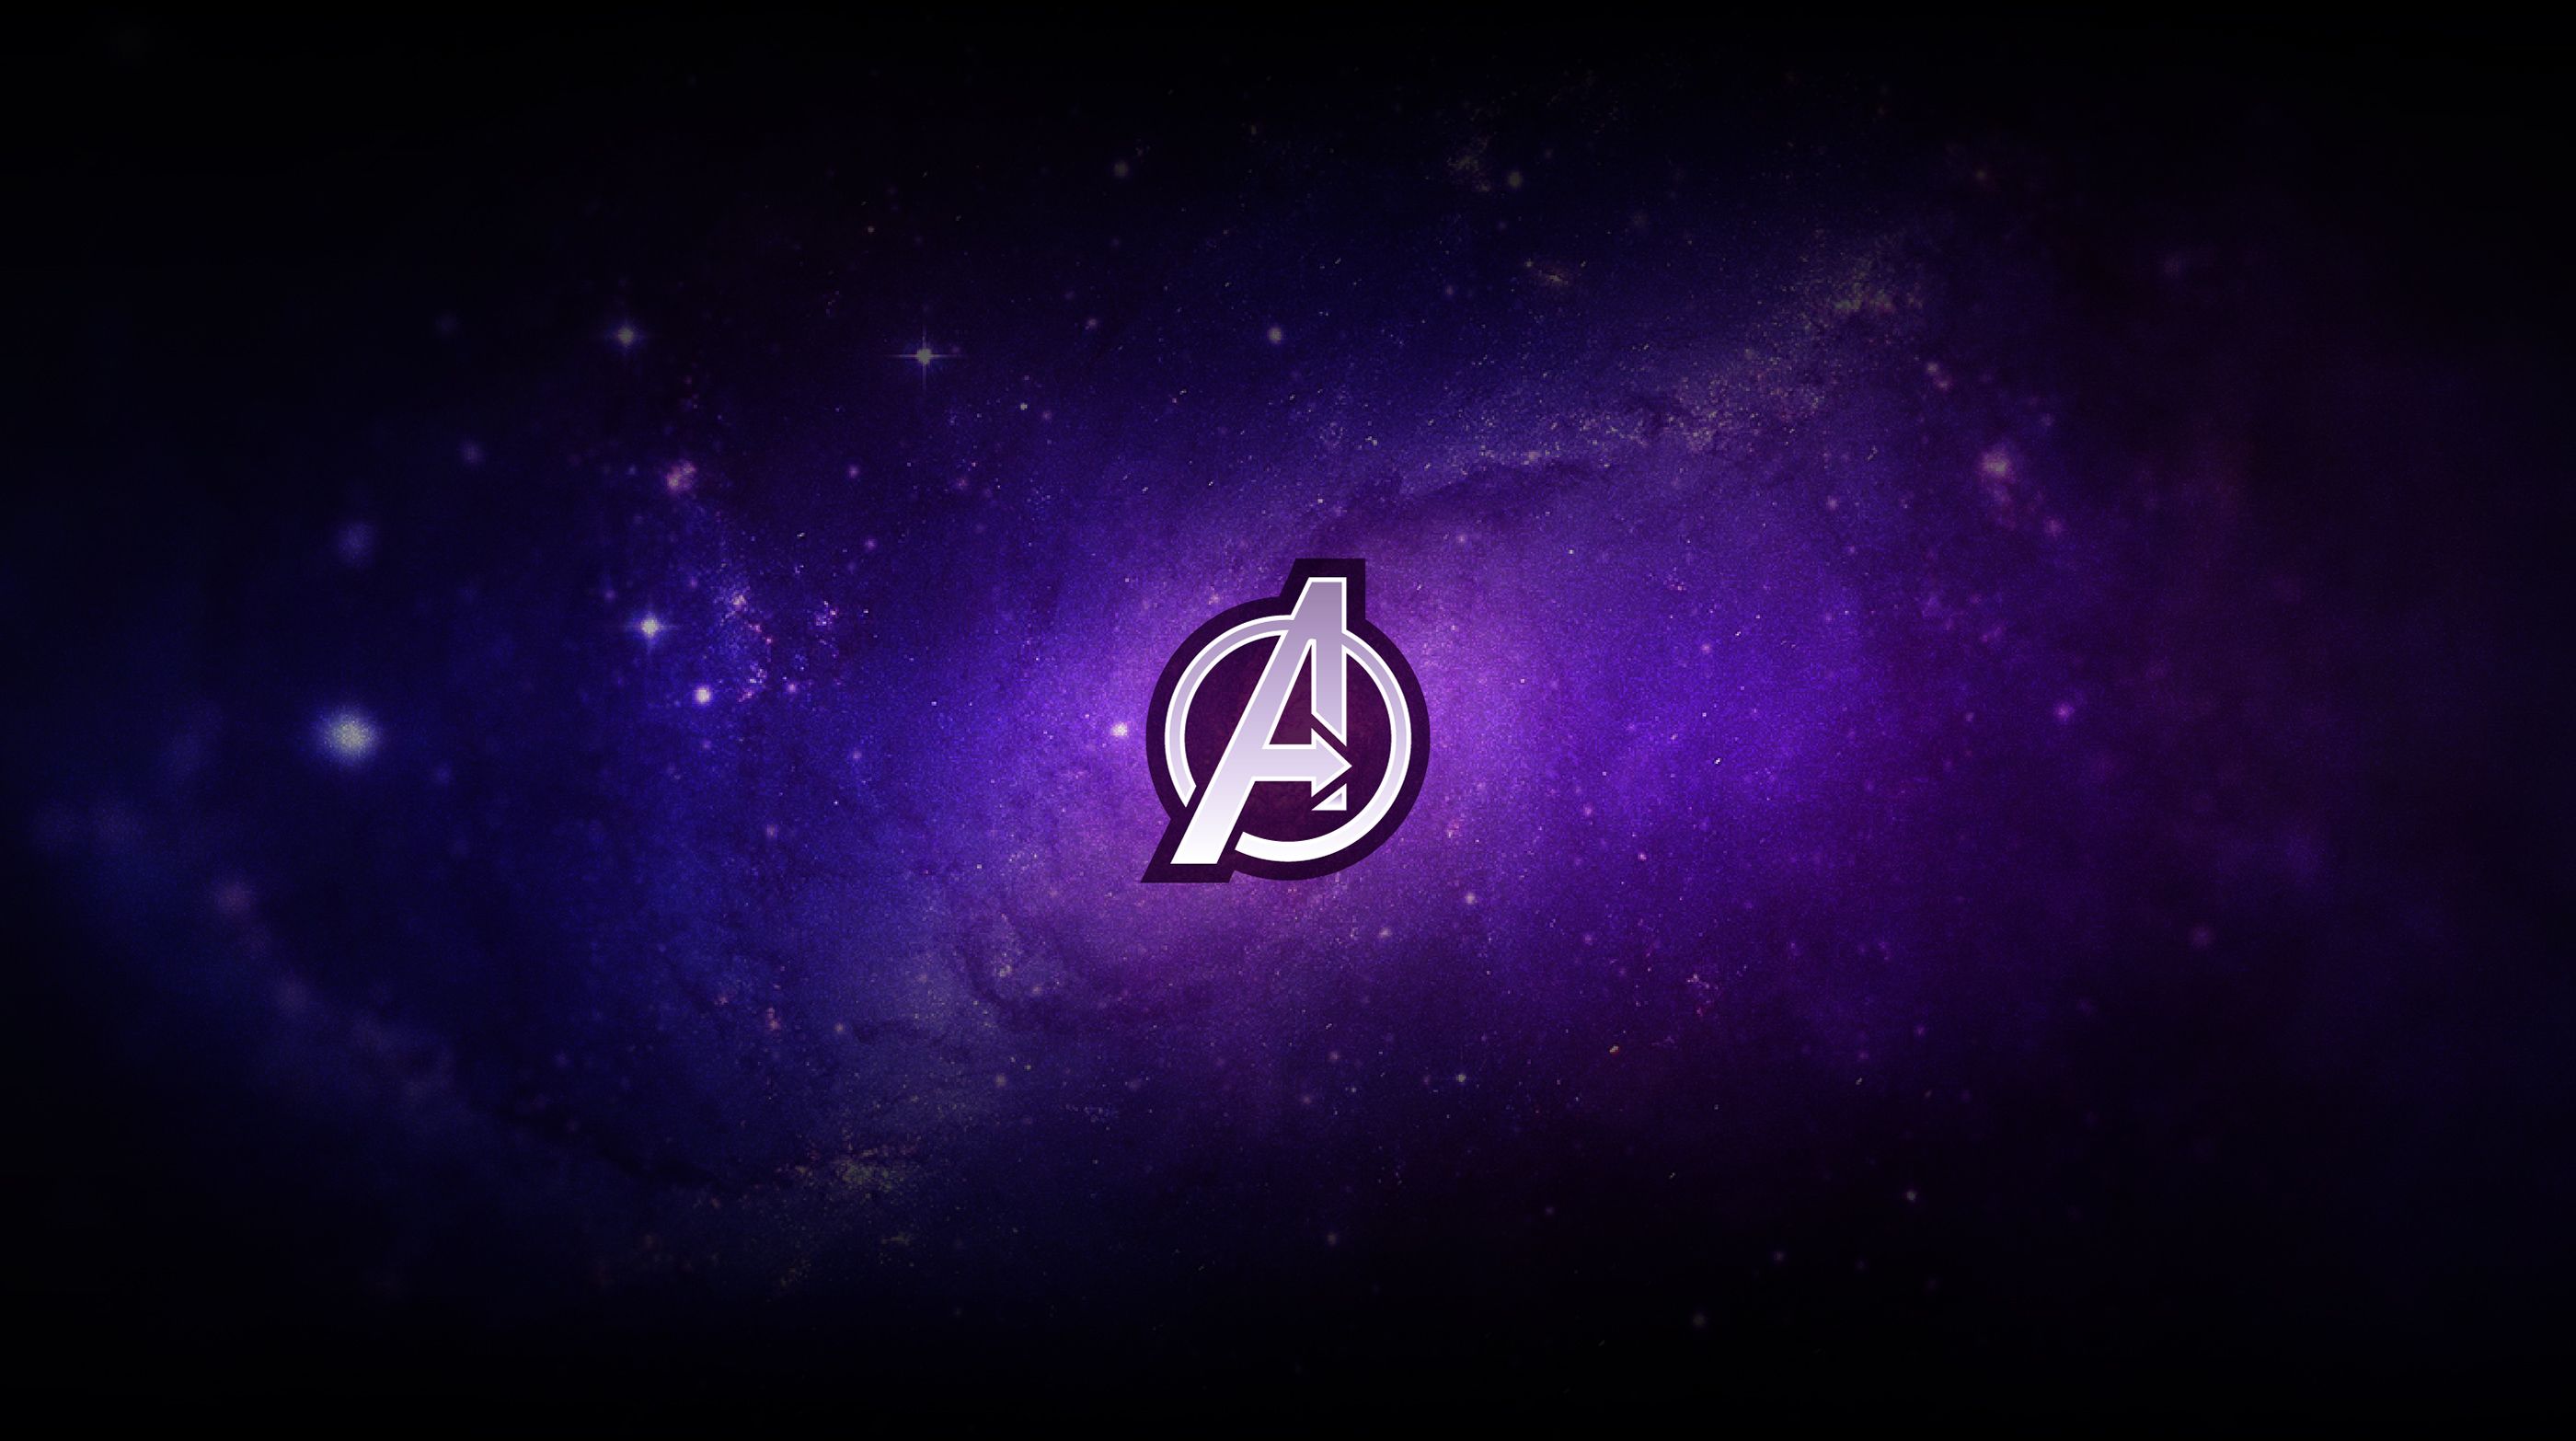 Avengers Logo, HD Superheroes, 4k Wallpaper, Image, Background, Photo and Picture